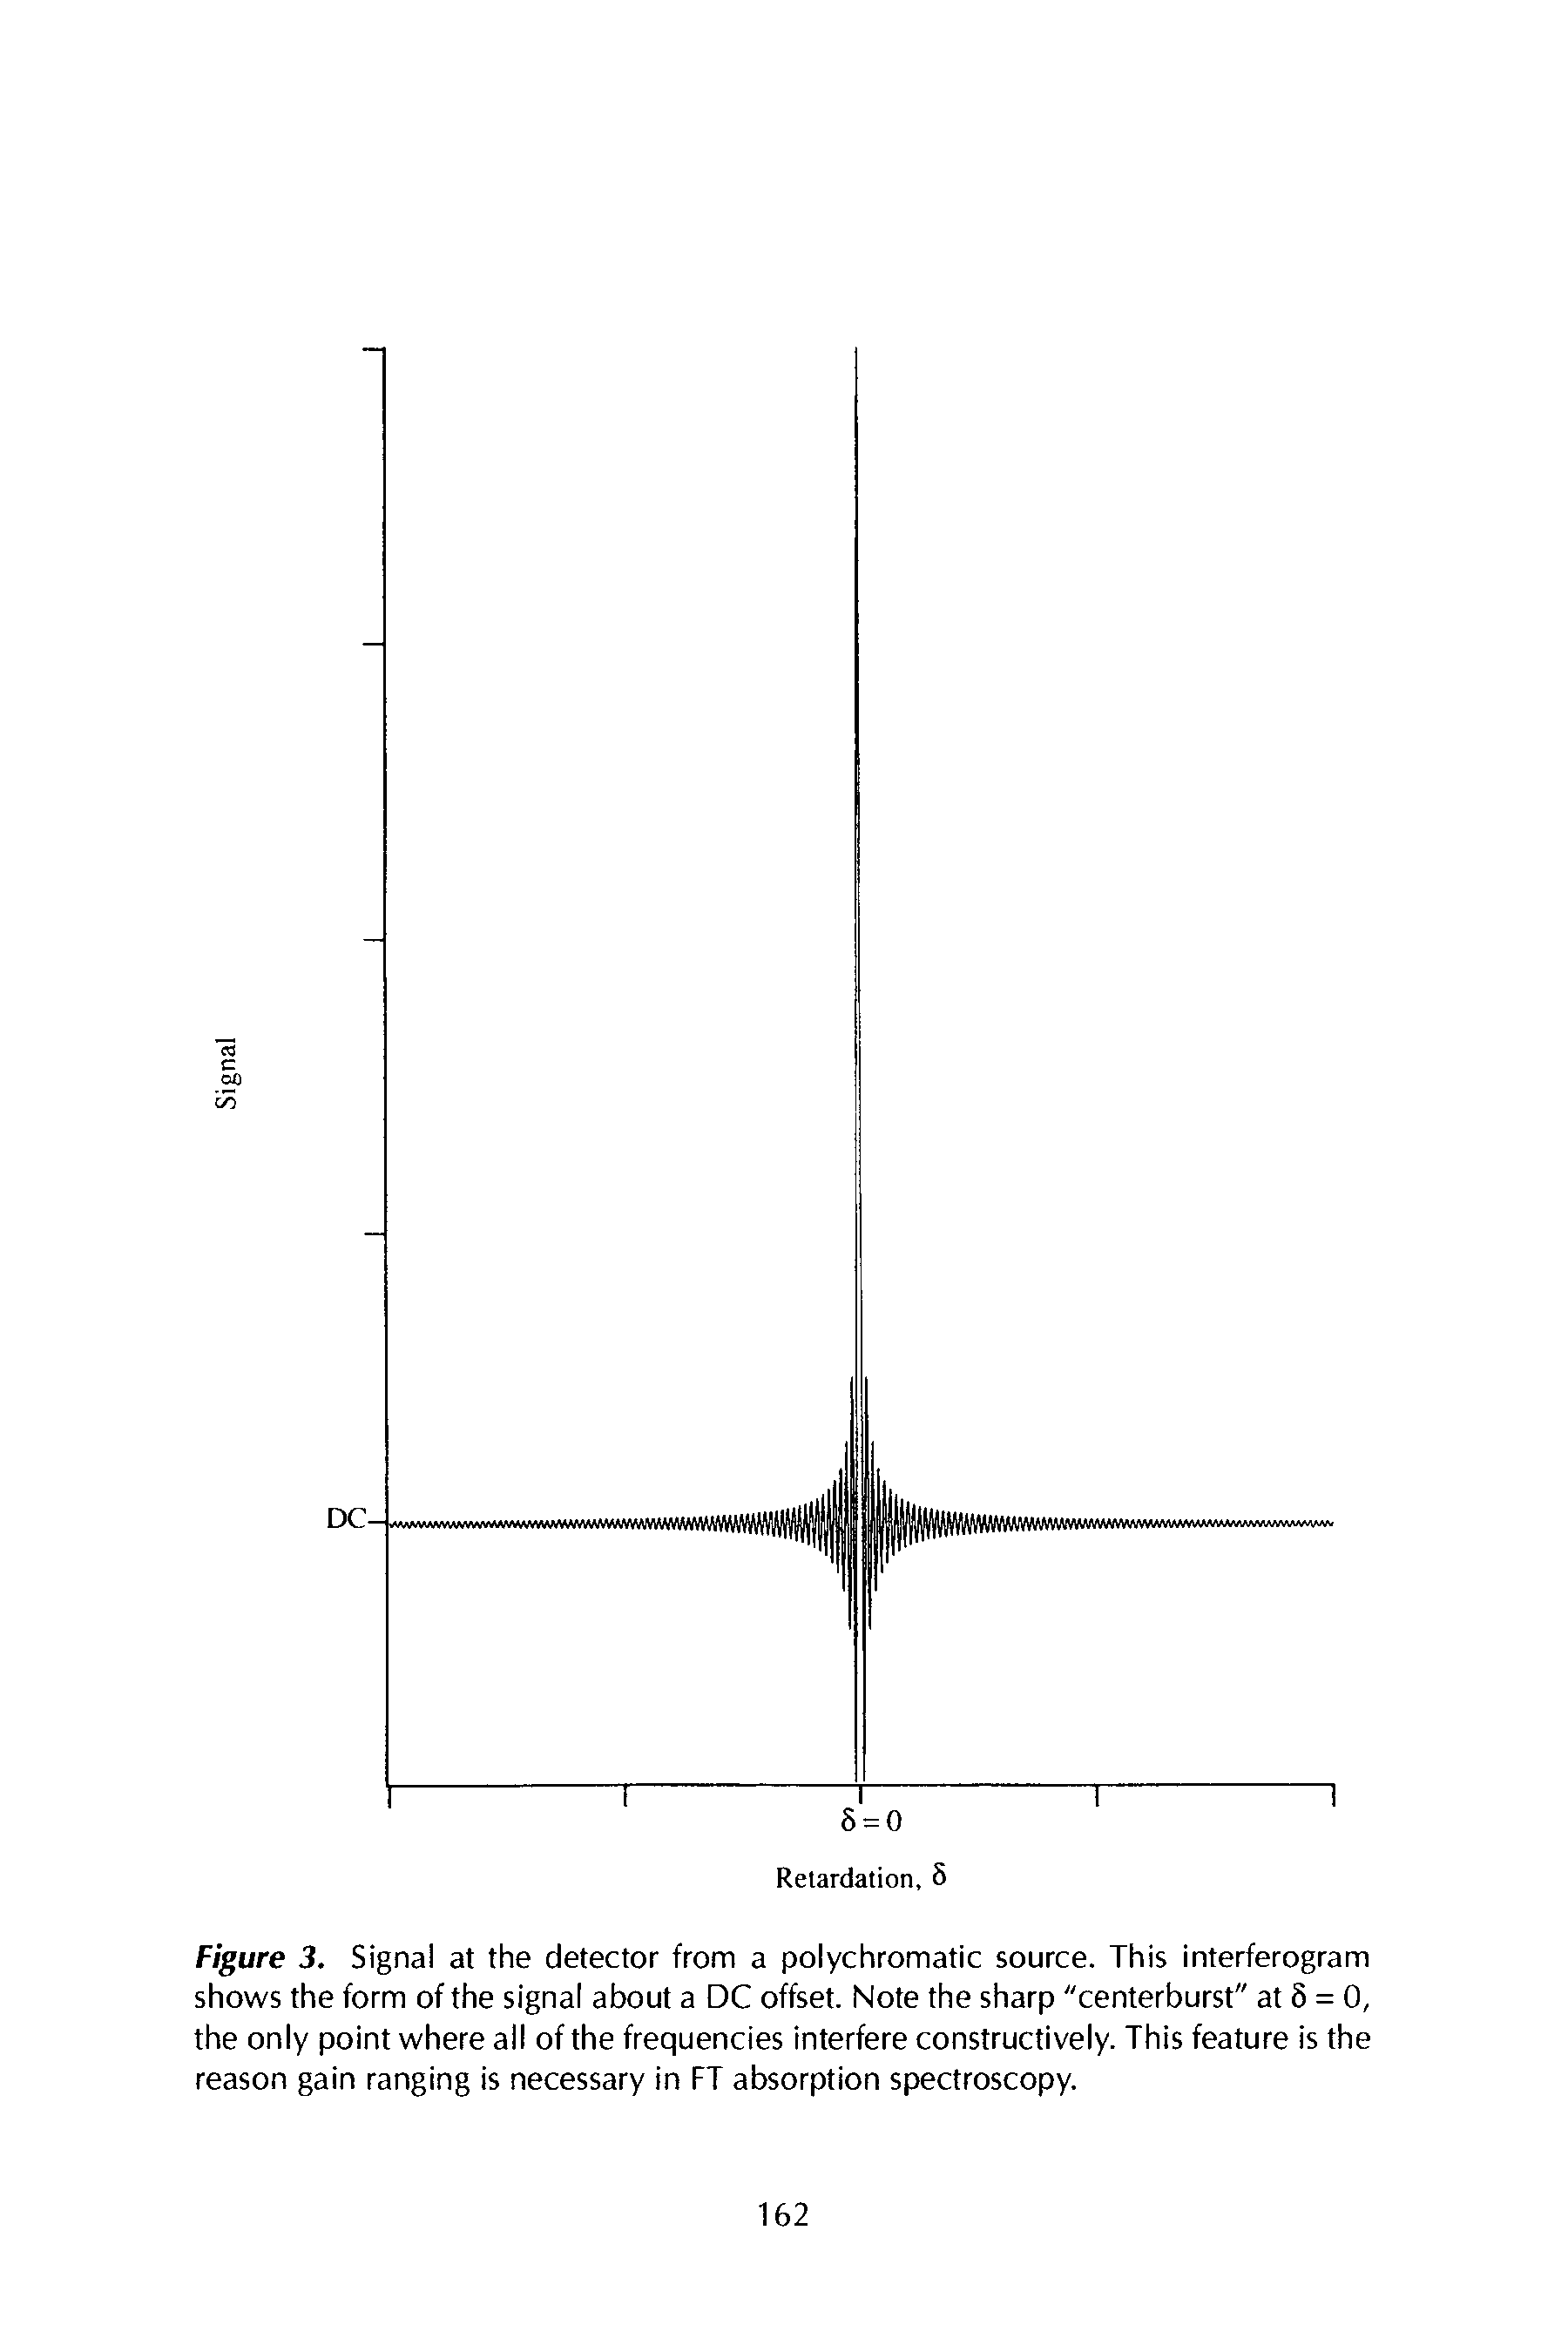 Figure 3. Signal at the detector from a polychromatic source. This interferogram shows the form of the signal about a DC offset. Note the sharp "centerburst" at 5 = 0, the only point where all of the frequencies interfere constructively. This feature is the reason gain ranging is necessary in FT absorption spectroscopy.